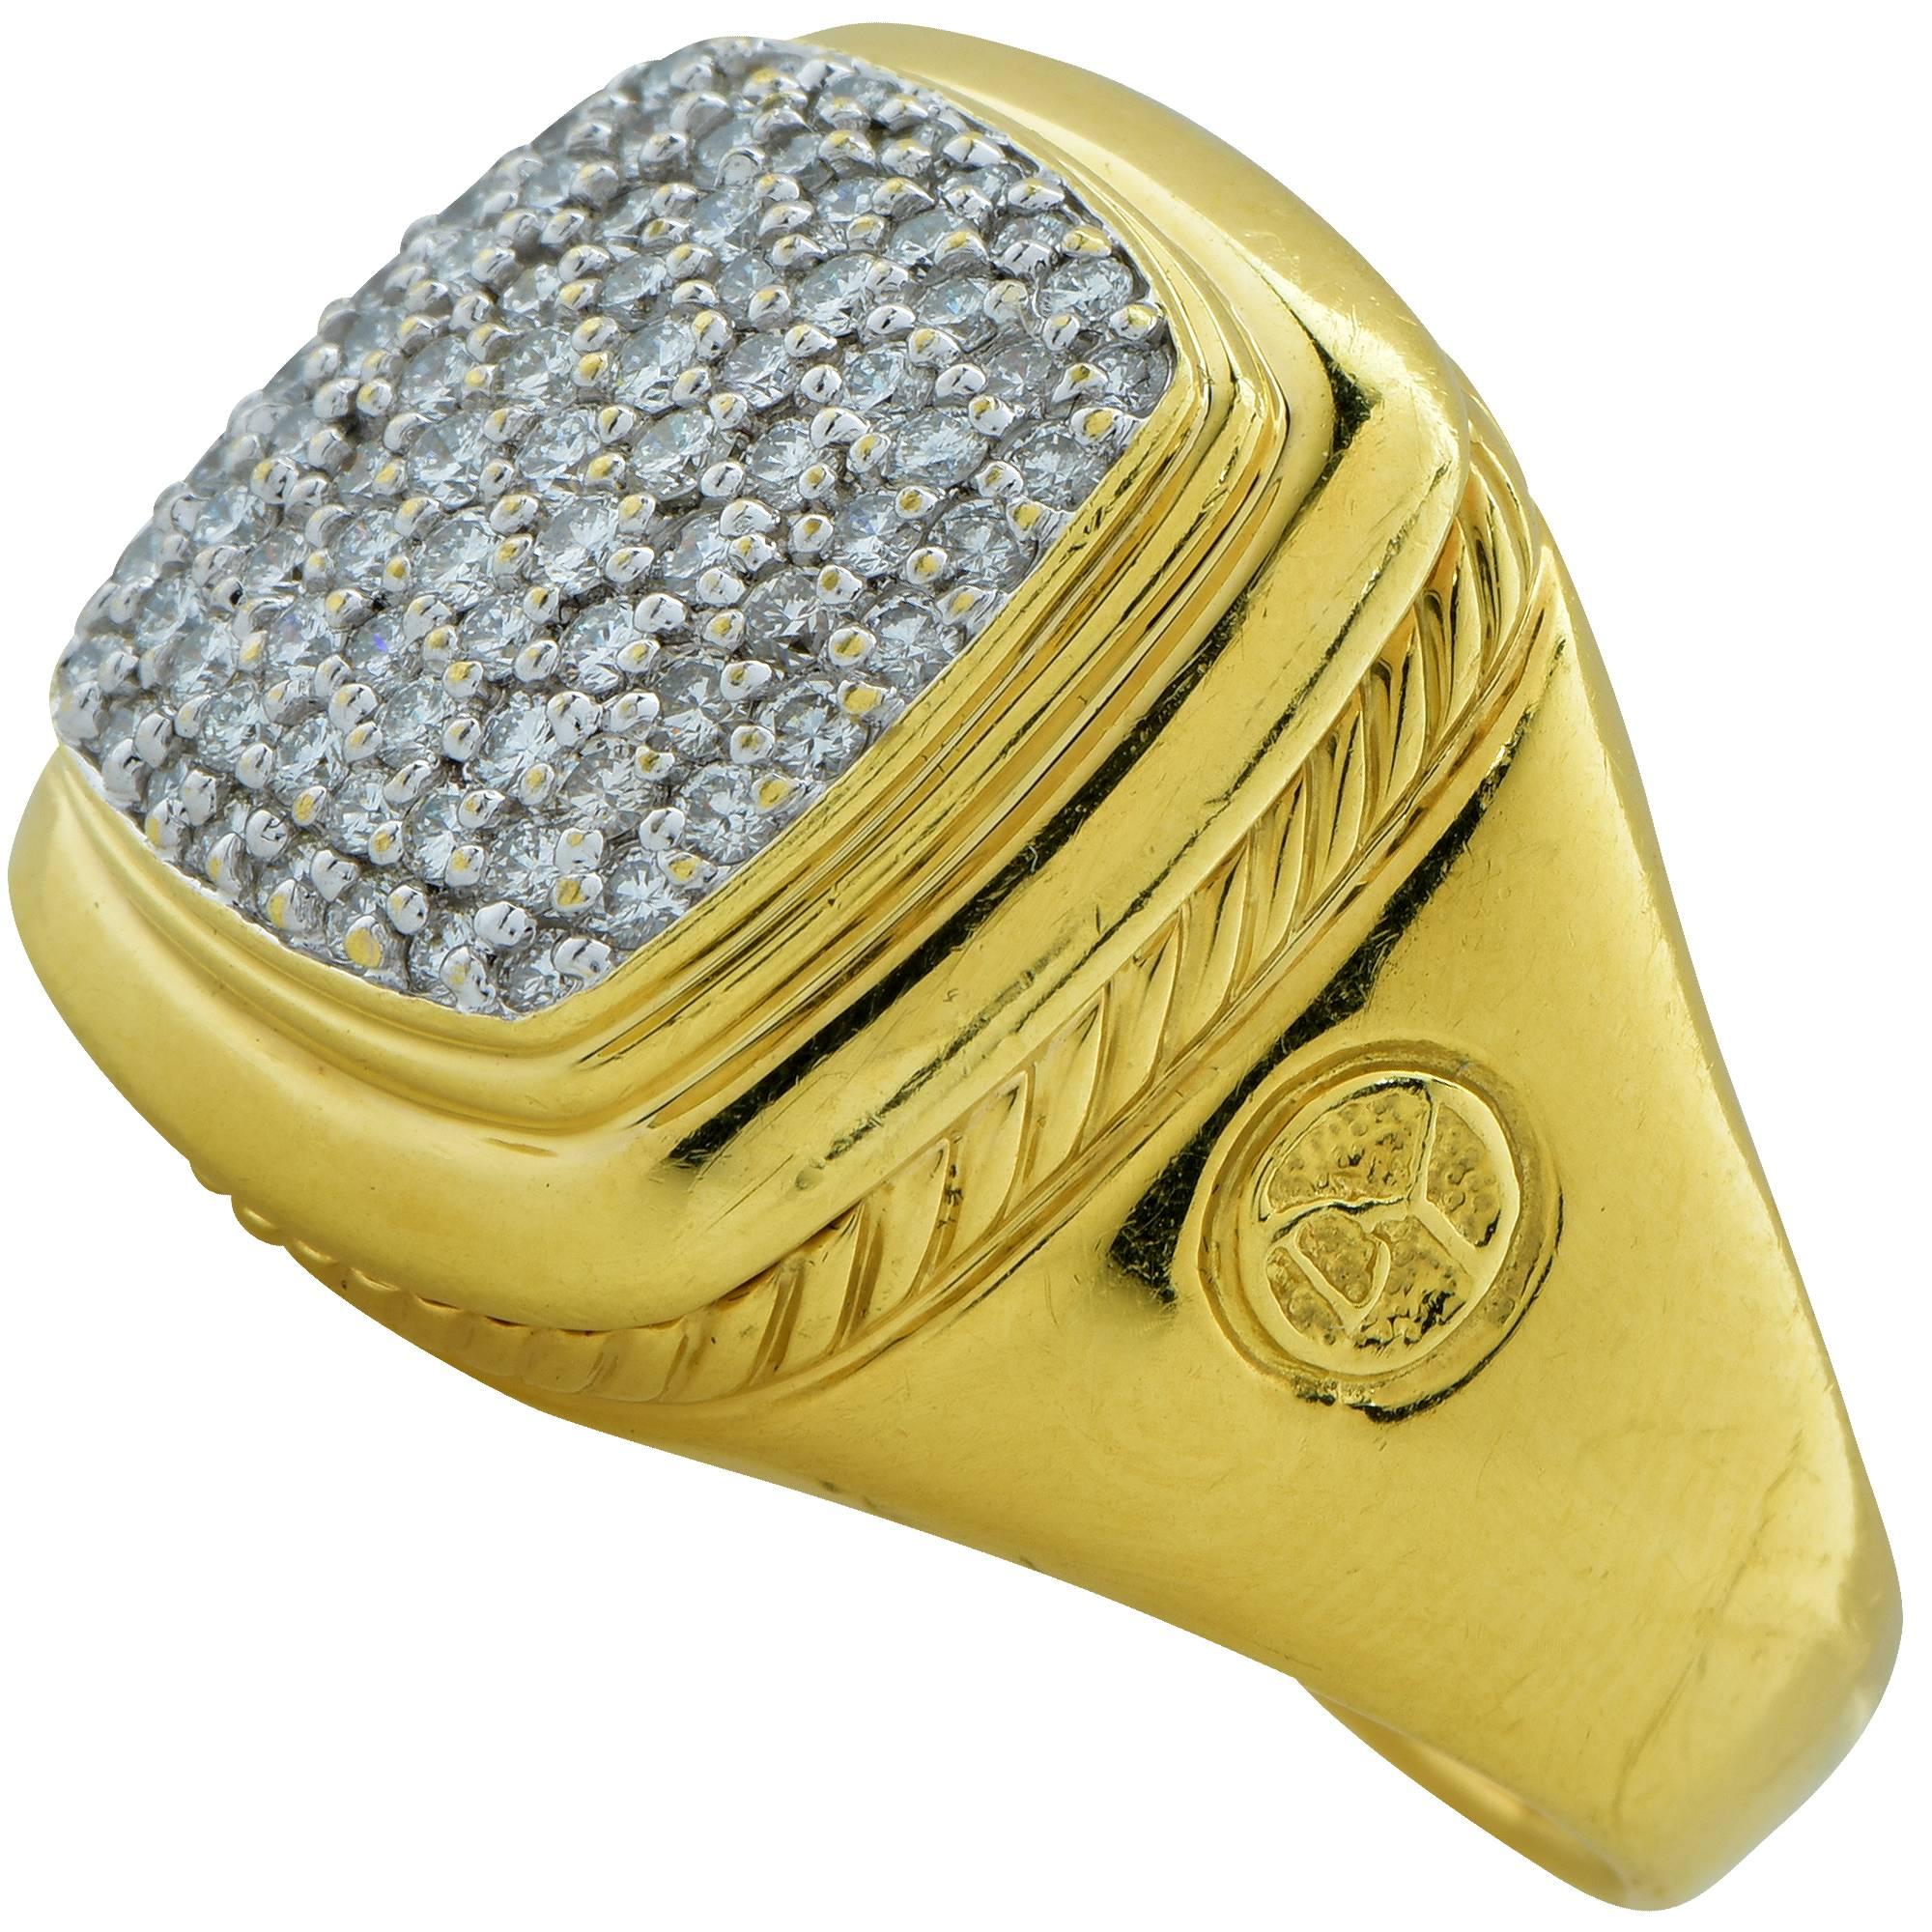 18k yellow gold David Yurman ring featuring 79 round brilliant cut diamonds weighing 1.50cts total G color VS clarity.

The ring is a size 9.5 and can be sized up or down.
Measurements are available upon request.
It is stamped and/or tested as 18k